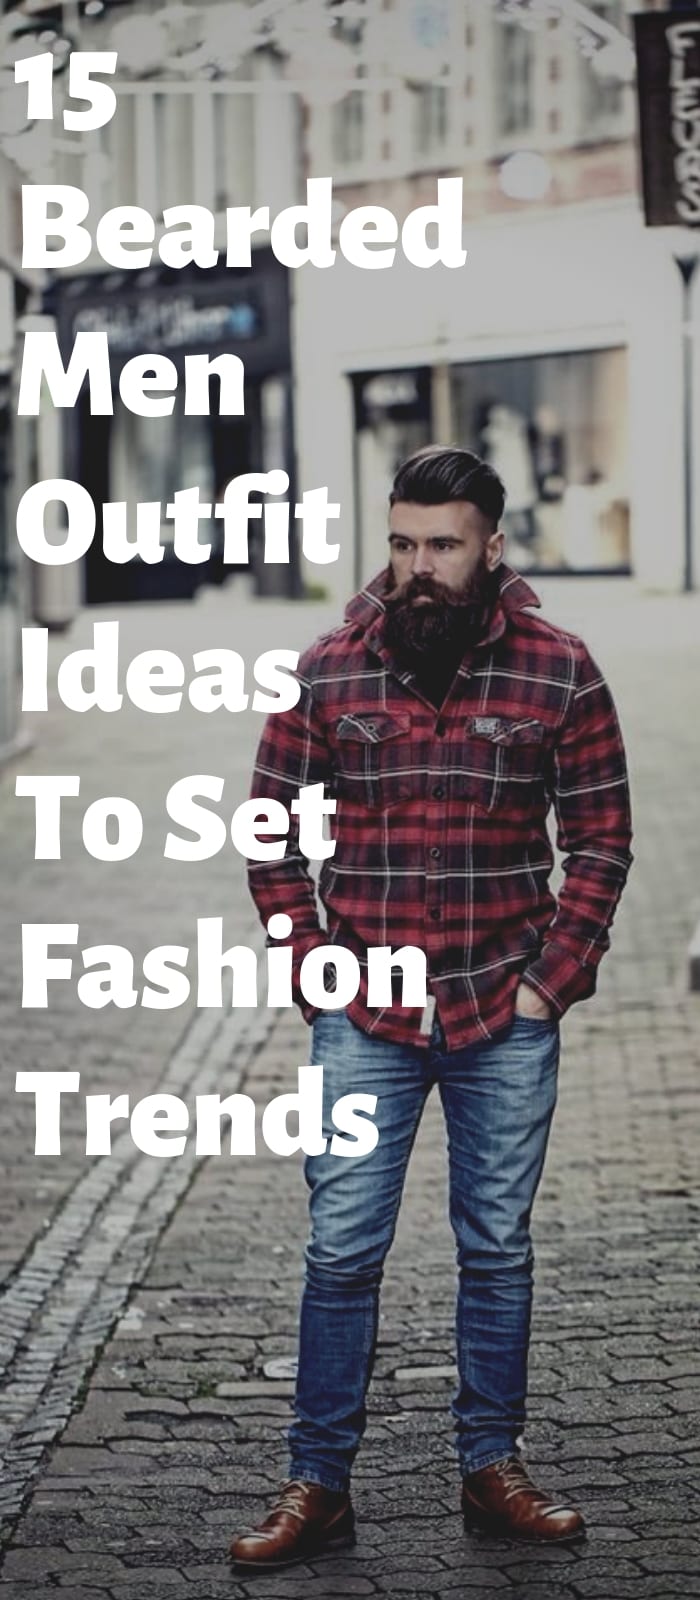 15 Bearded Men Outfit Ideas To Set Fashion Trends!